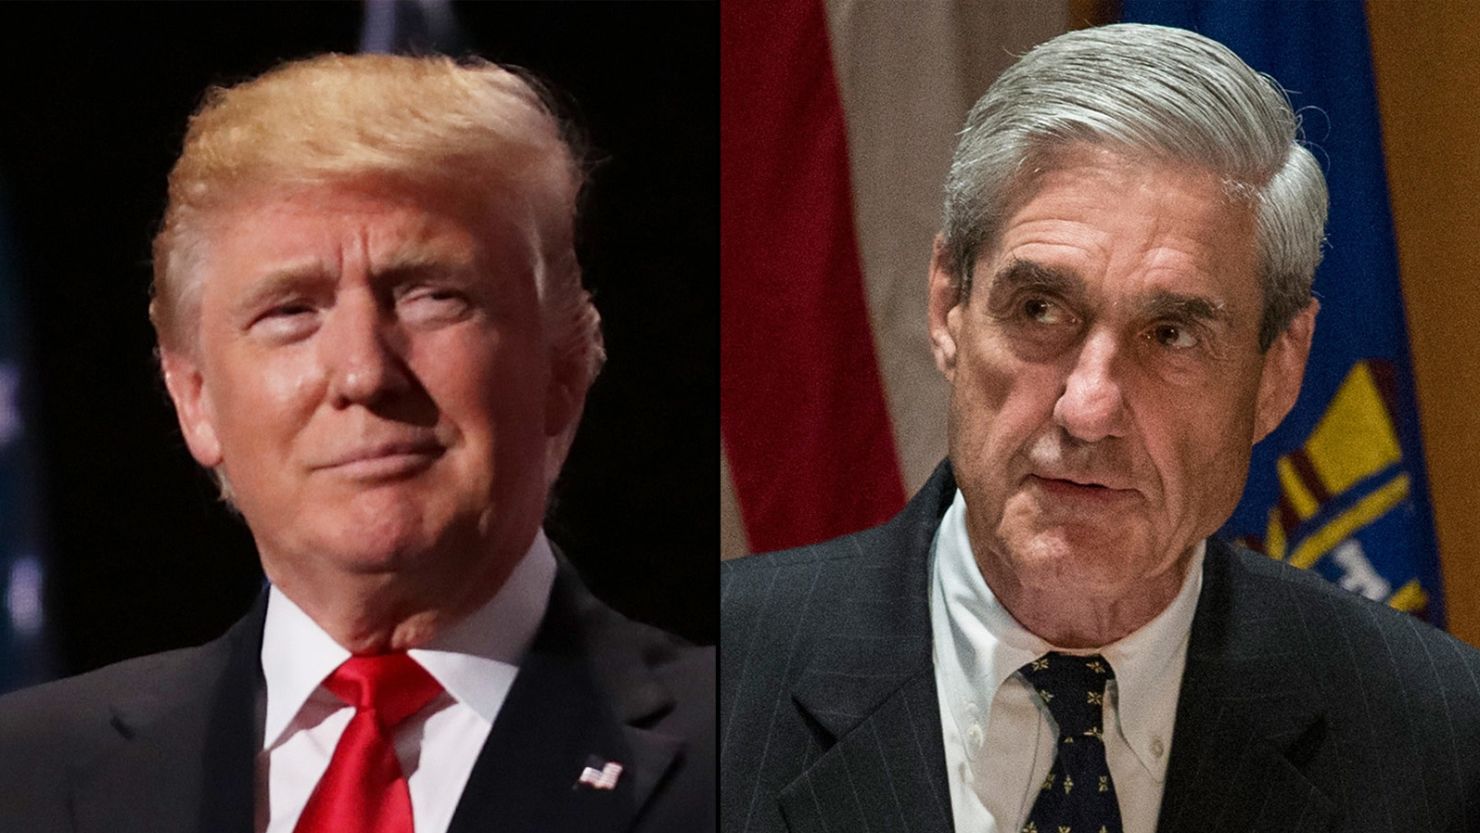 President Donald Trump and special counsel Robert Mueller. (Photos by Andrew Burton/Getty Images and Chip Somodevilla/Getty Images)